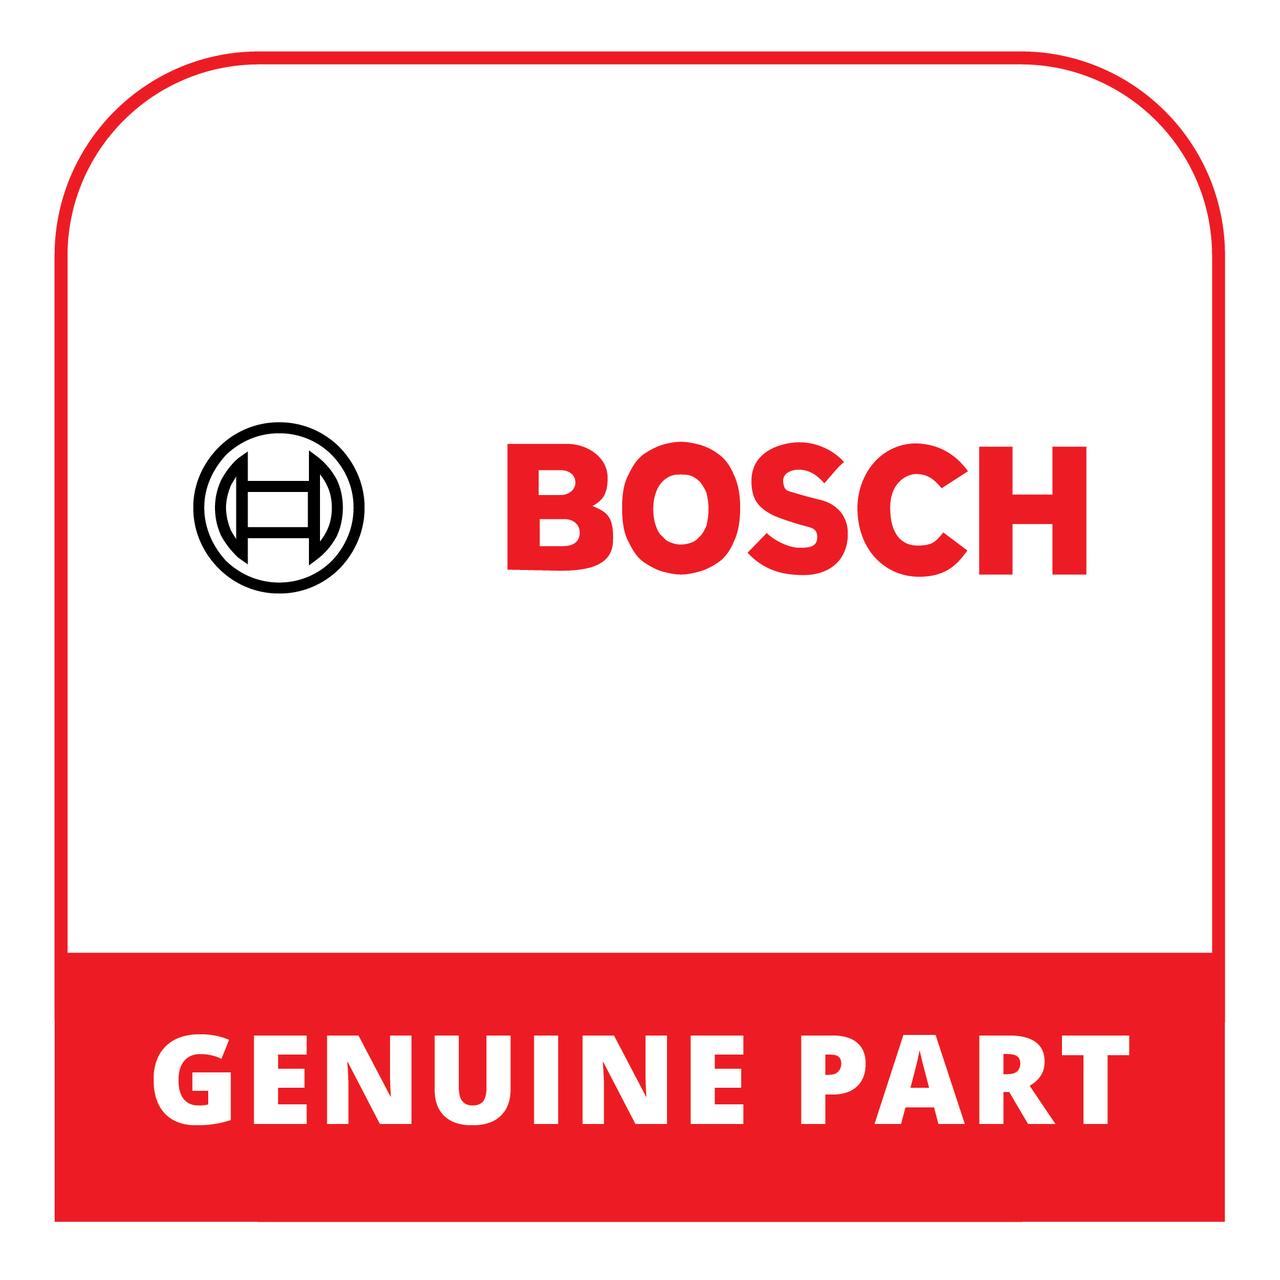 Bosch (Thermador) 12034018 - Control Module Not Programmed - Genuine Bosch (Thermador) Part